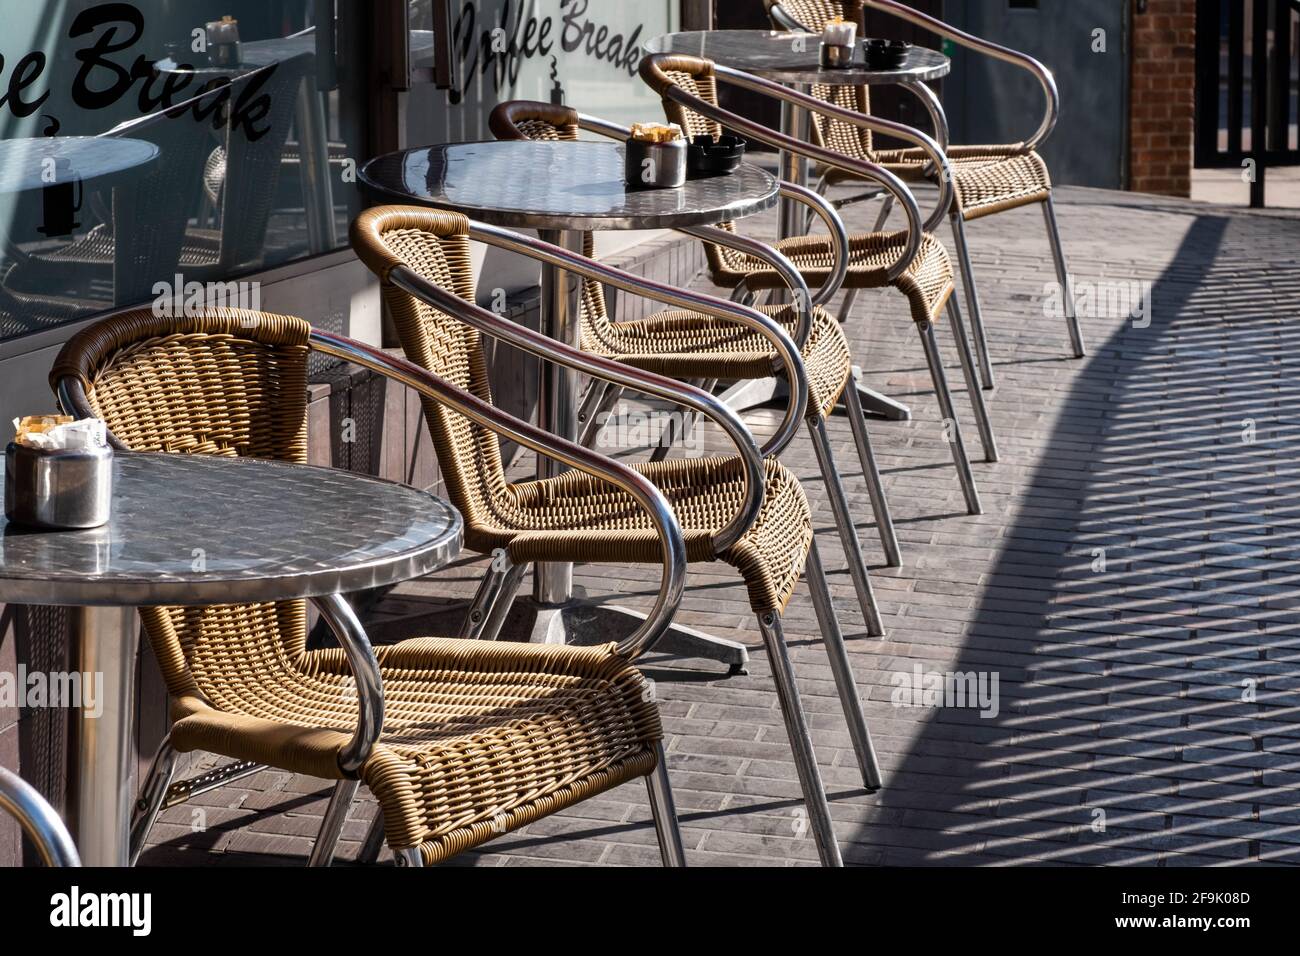 Kingston Upon Thames London UK, April 19 2021, Empty Table And Chairs Seating Outside A Cafe Or Restaurnat As Covid Restrictions Are Lifted Stock Photo